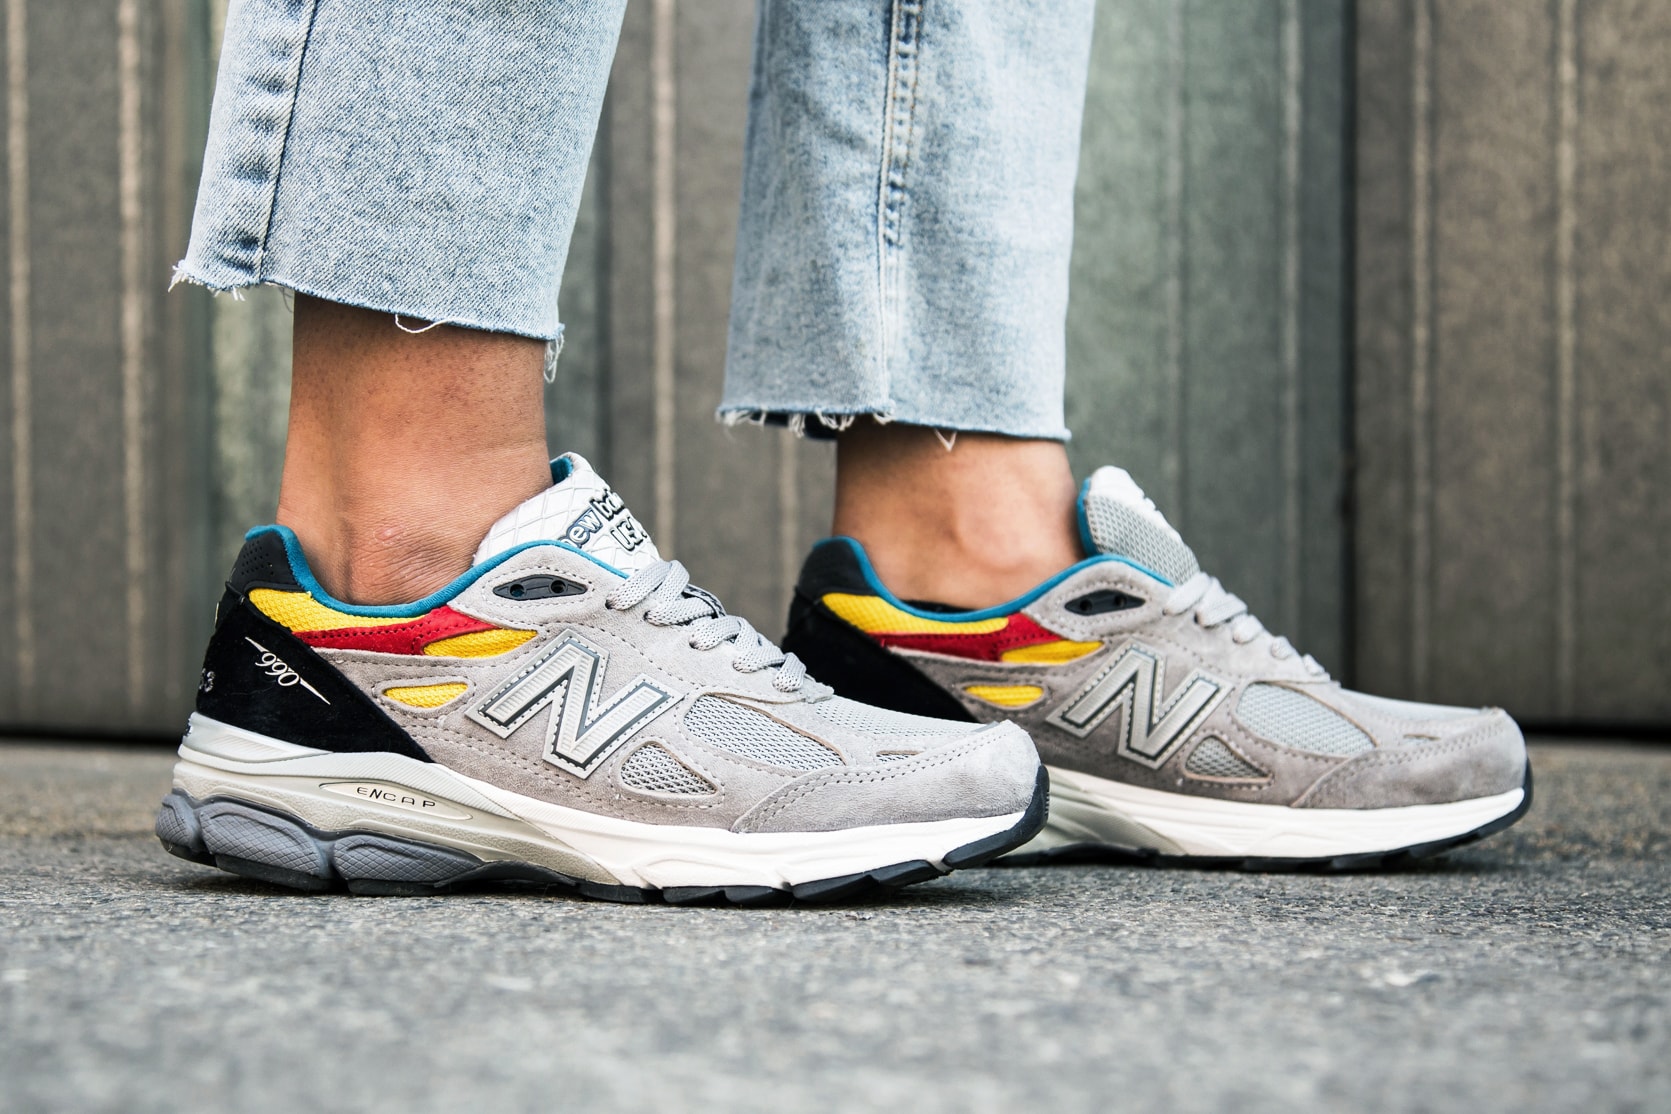 Aries New Balance 990v3 Trainers On-Foot Look |